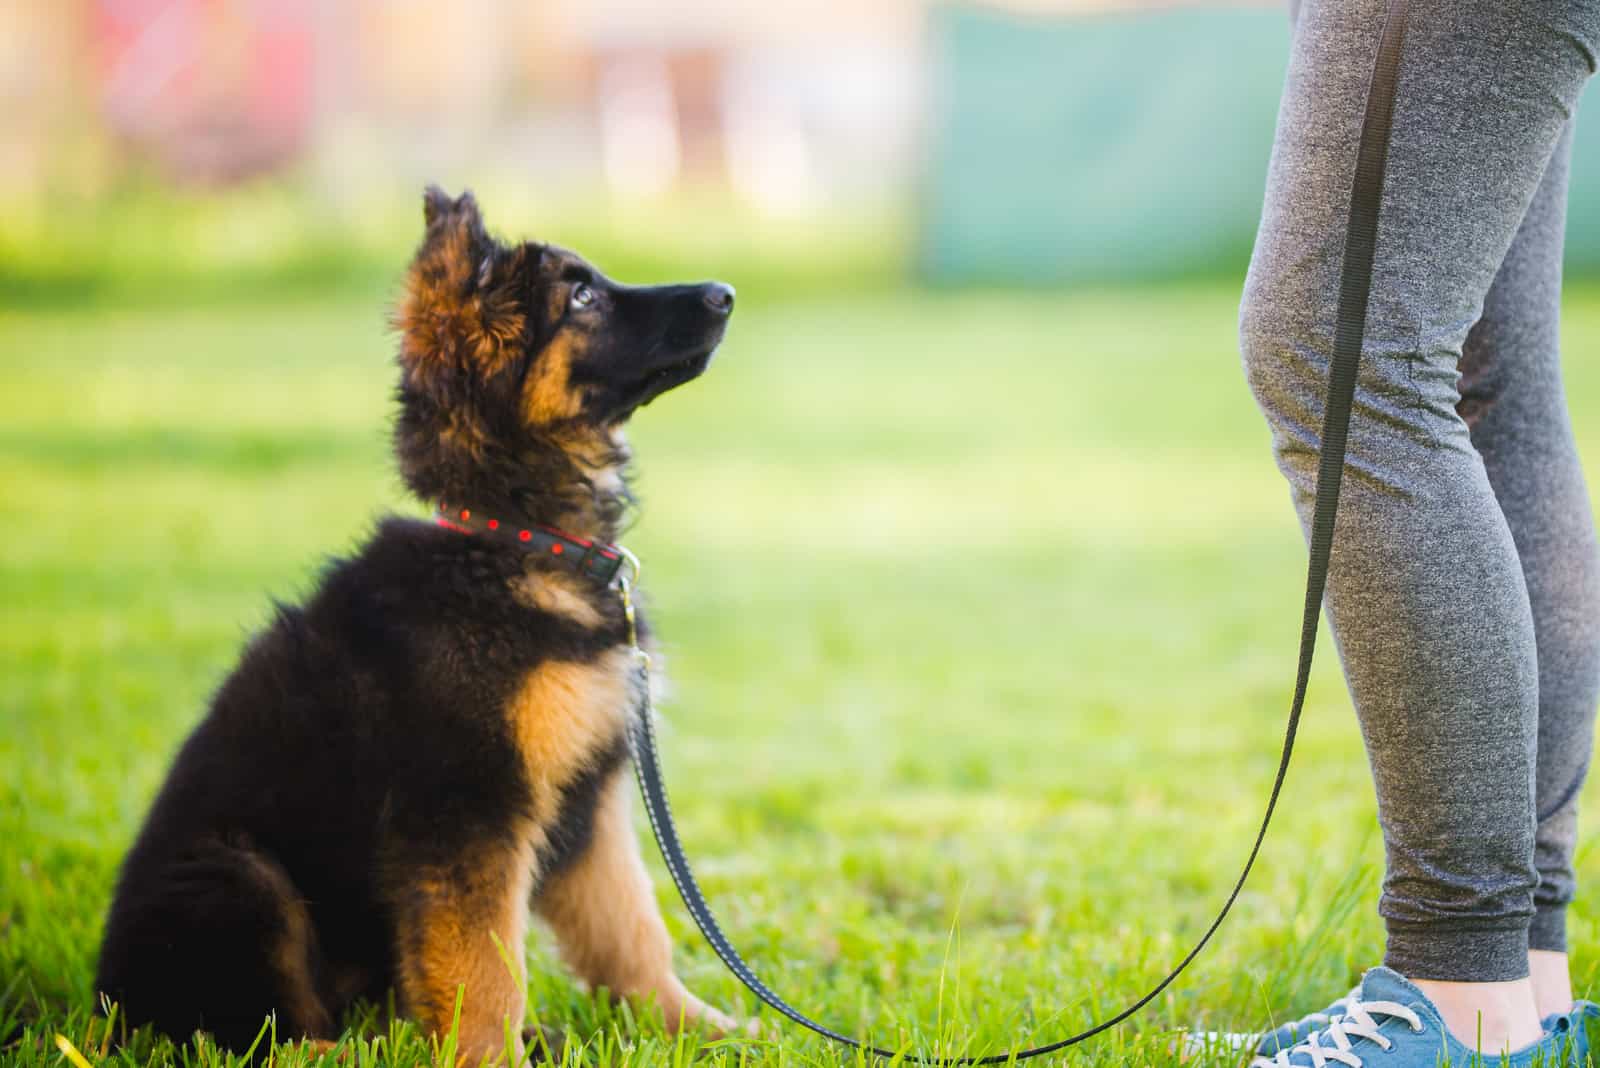 German shepherd puppy sitting and training with the owner